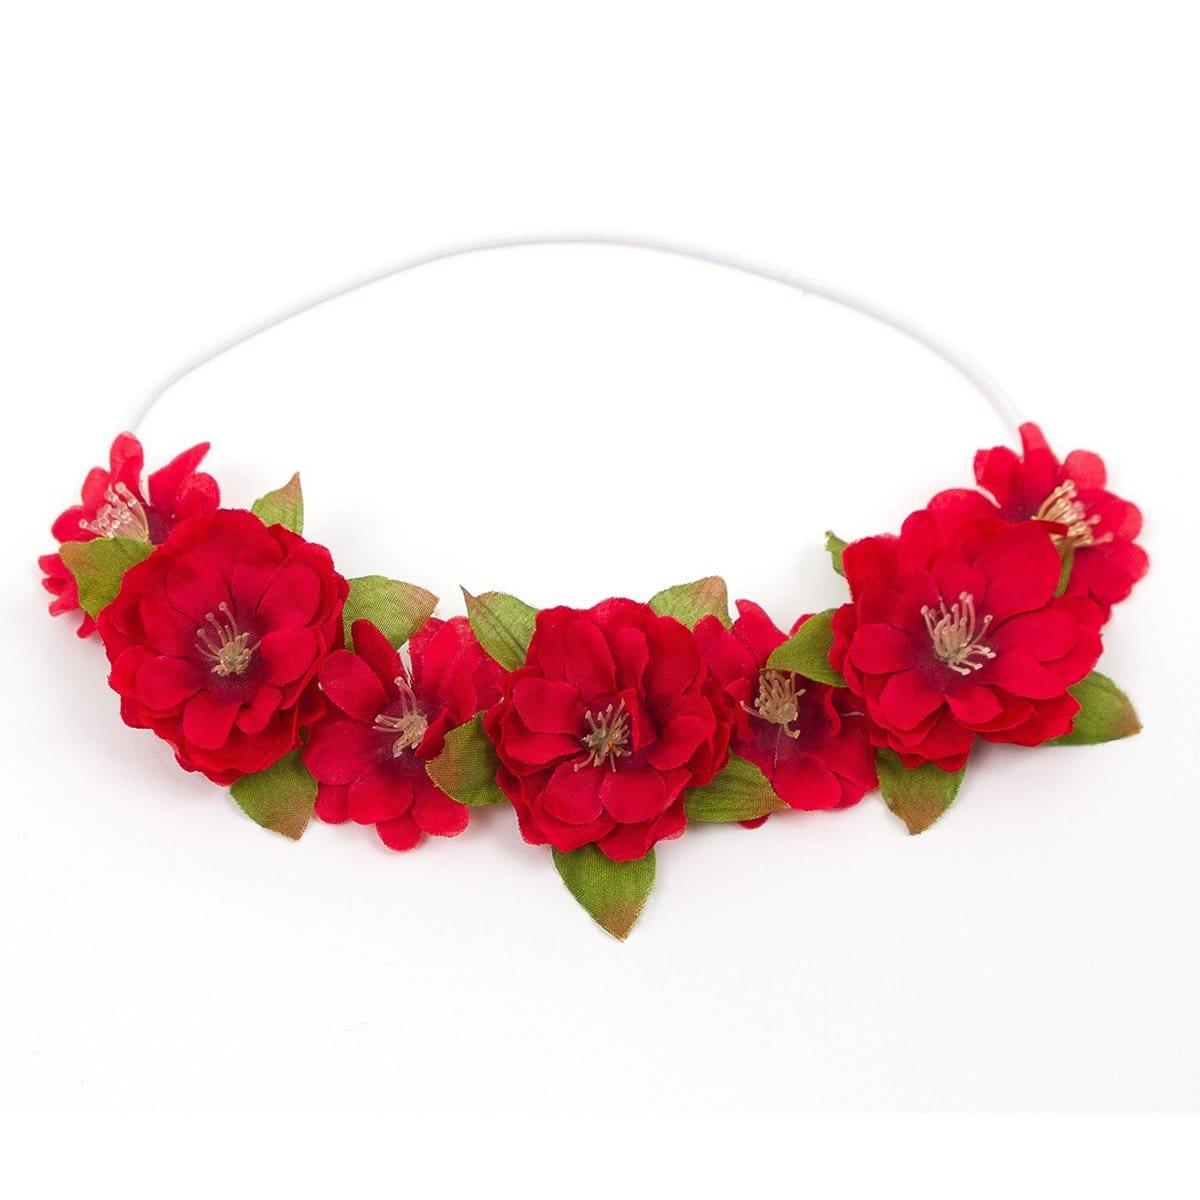 Buy Costume Accessories Ruby red flower headband for kids sold at Party Expert